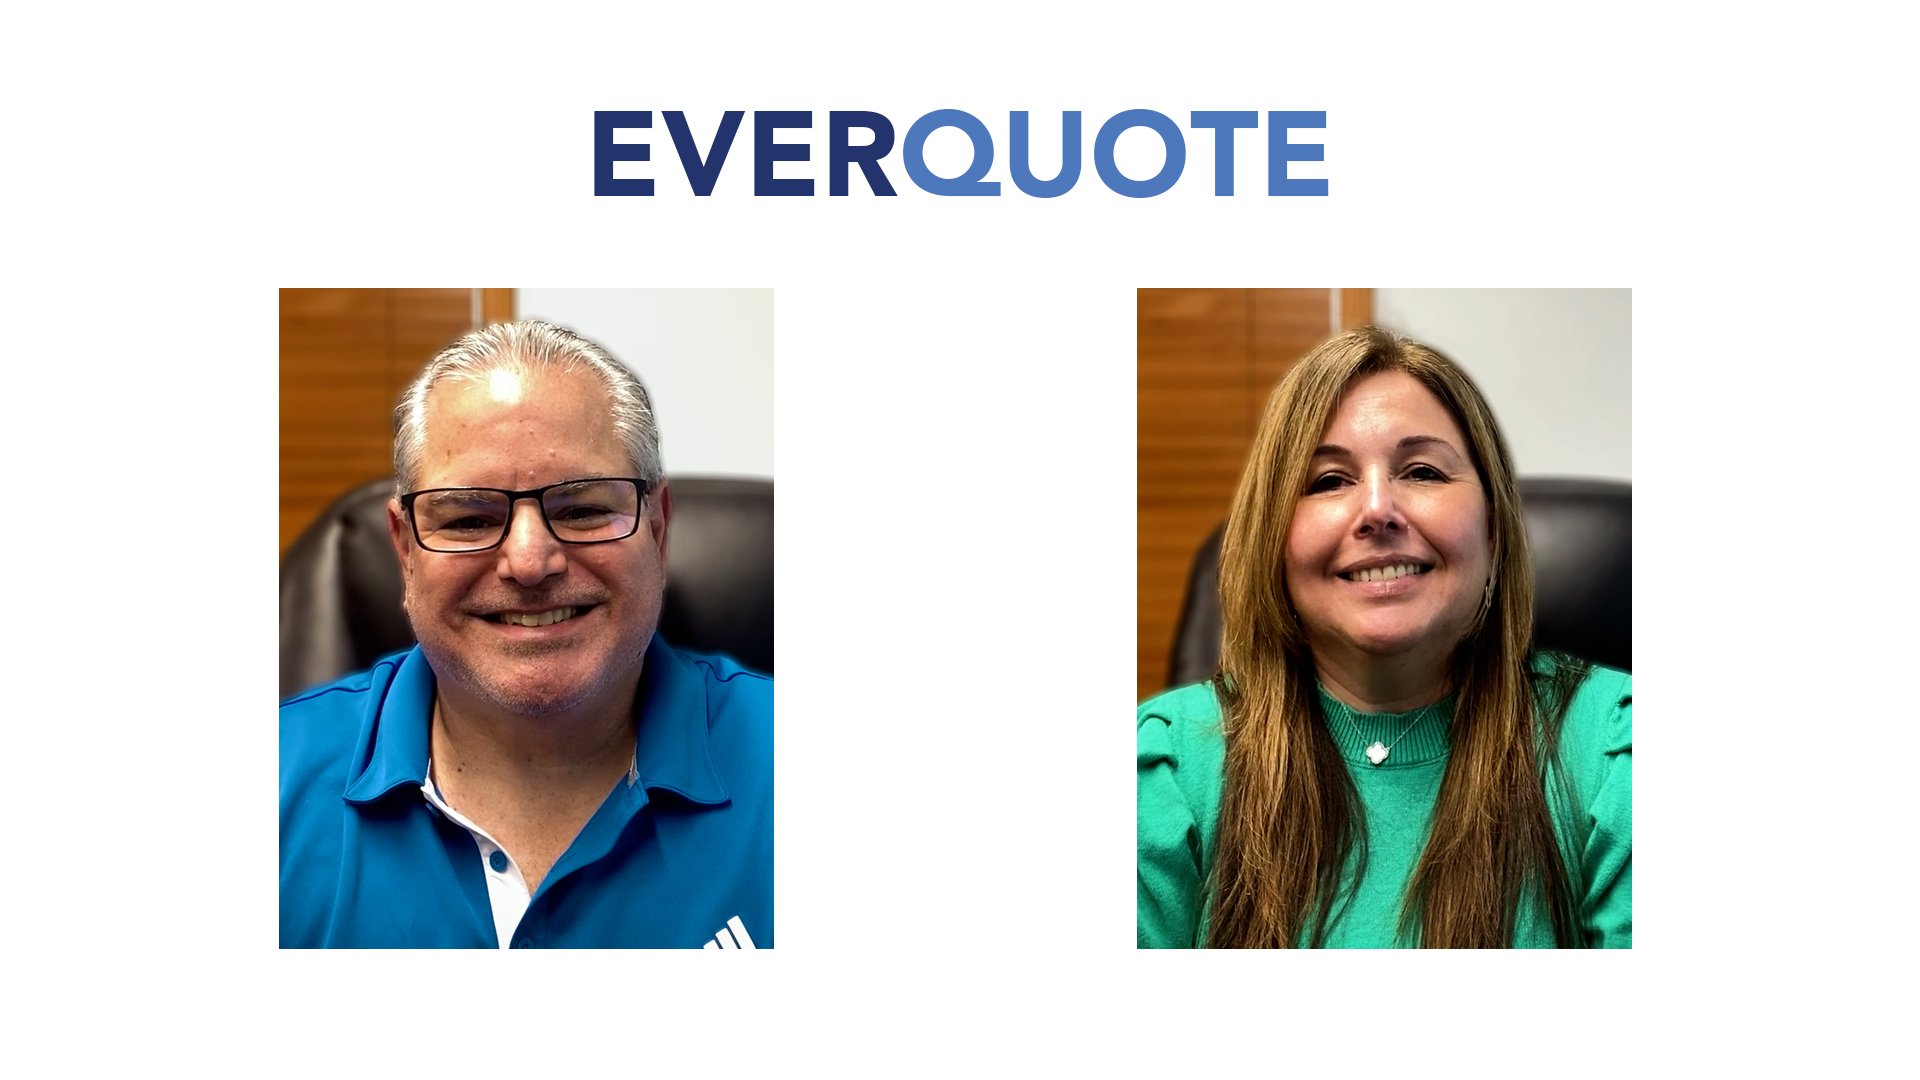 How Allstate agent James Greco Tripled Auto Production with EverQuote's Lead Connection Service (LCS)